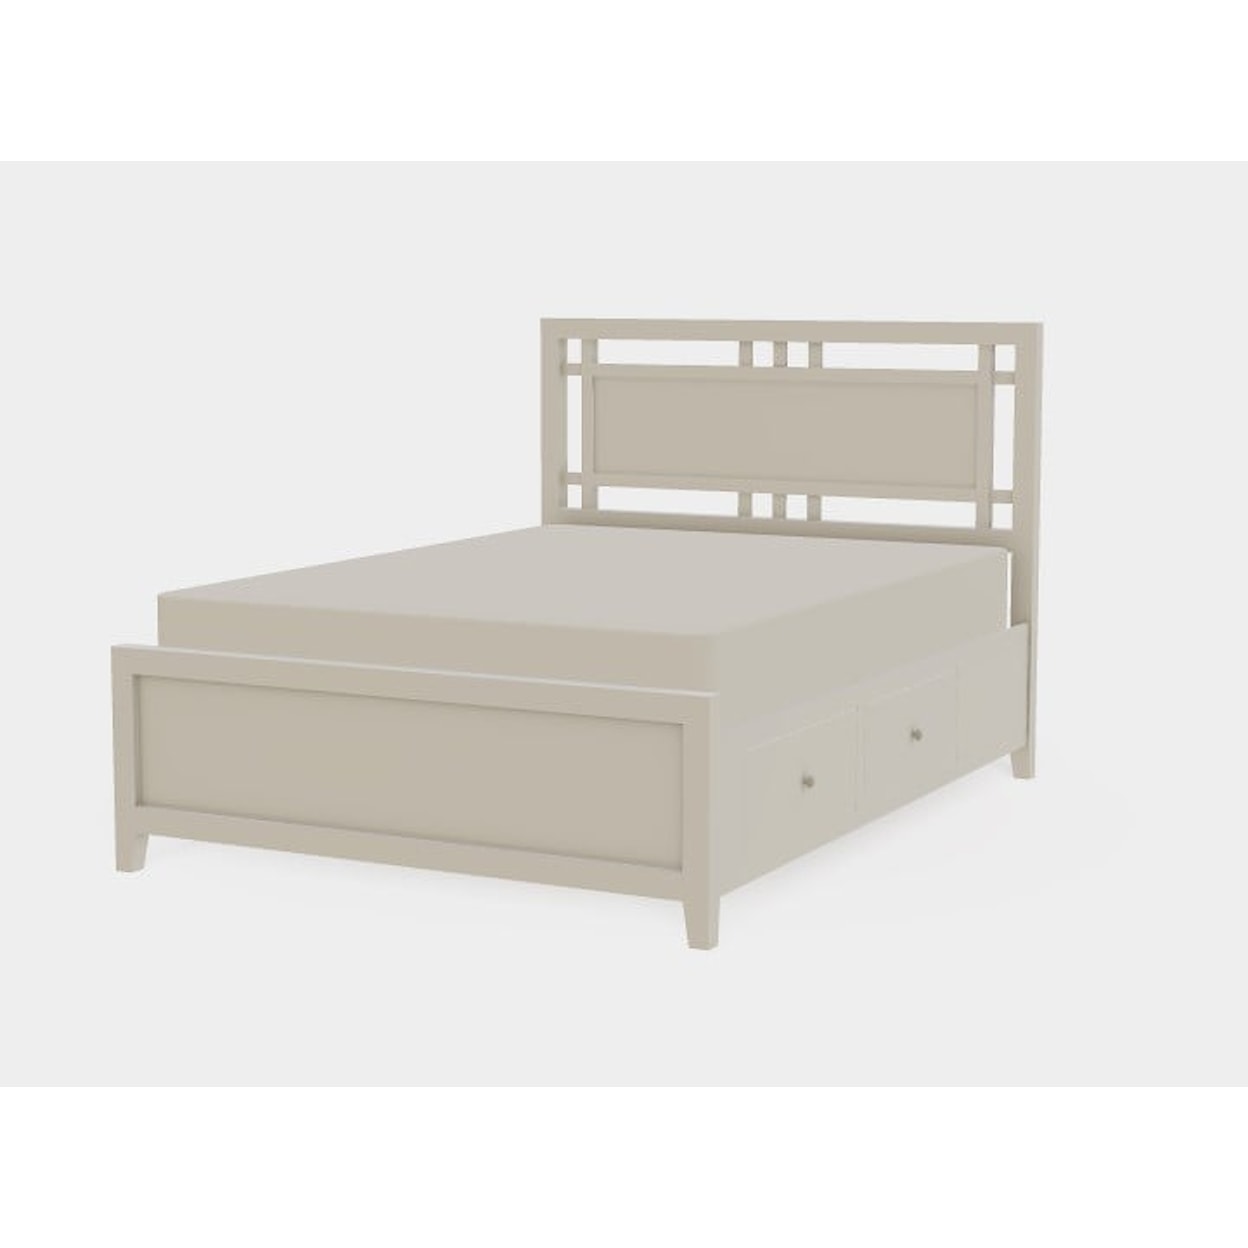 Mavin Atwood Group Atwood Queen Right Drawerside Gridwork Bed